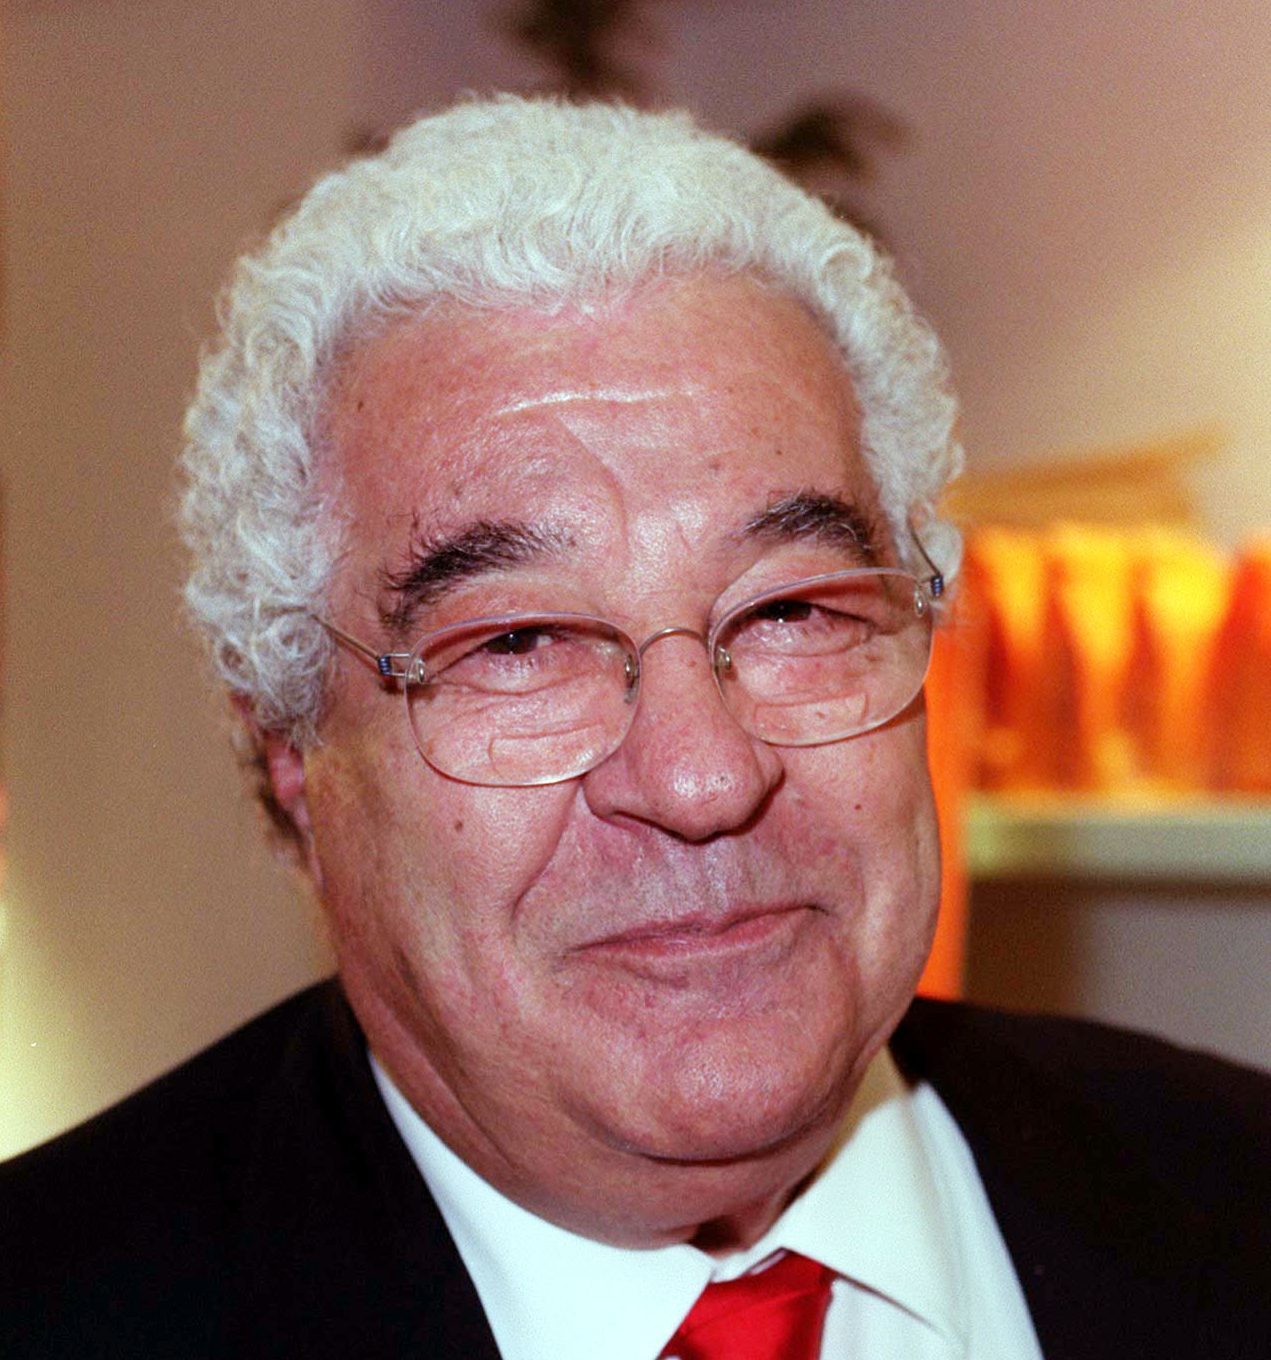 Celebrity chef and restaurateur Antonio Carluccio, who has died at the age of 80, his agent has said. (Michael Crabtree/PA Wire)